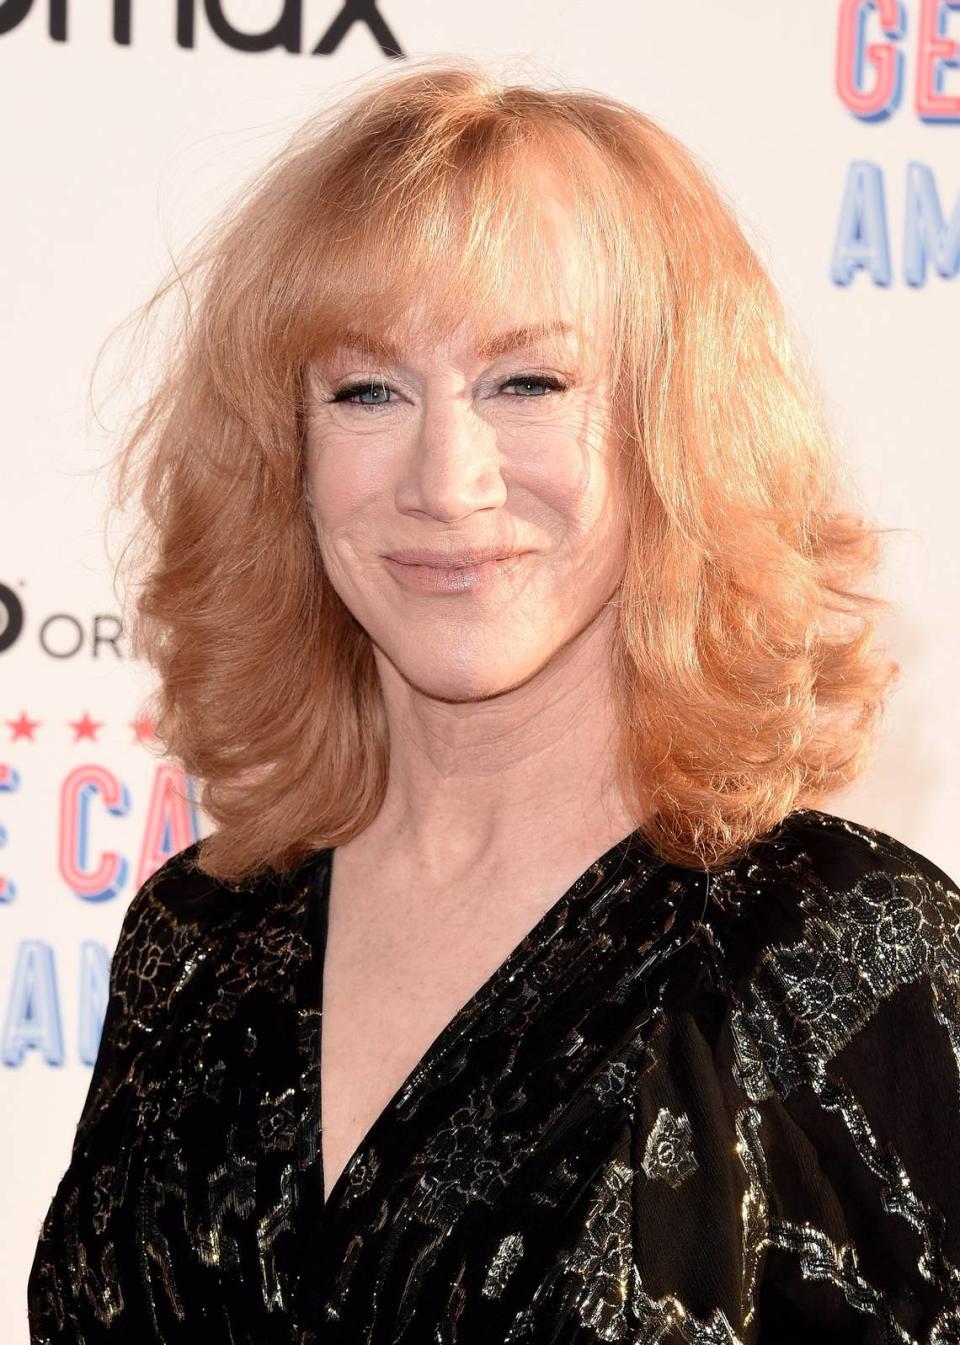 Comedian Kathy Griffin will perform at Lexington Opera House.